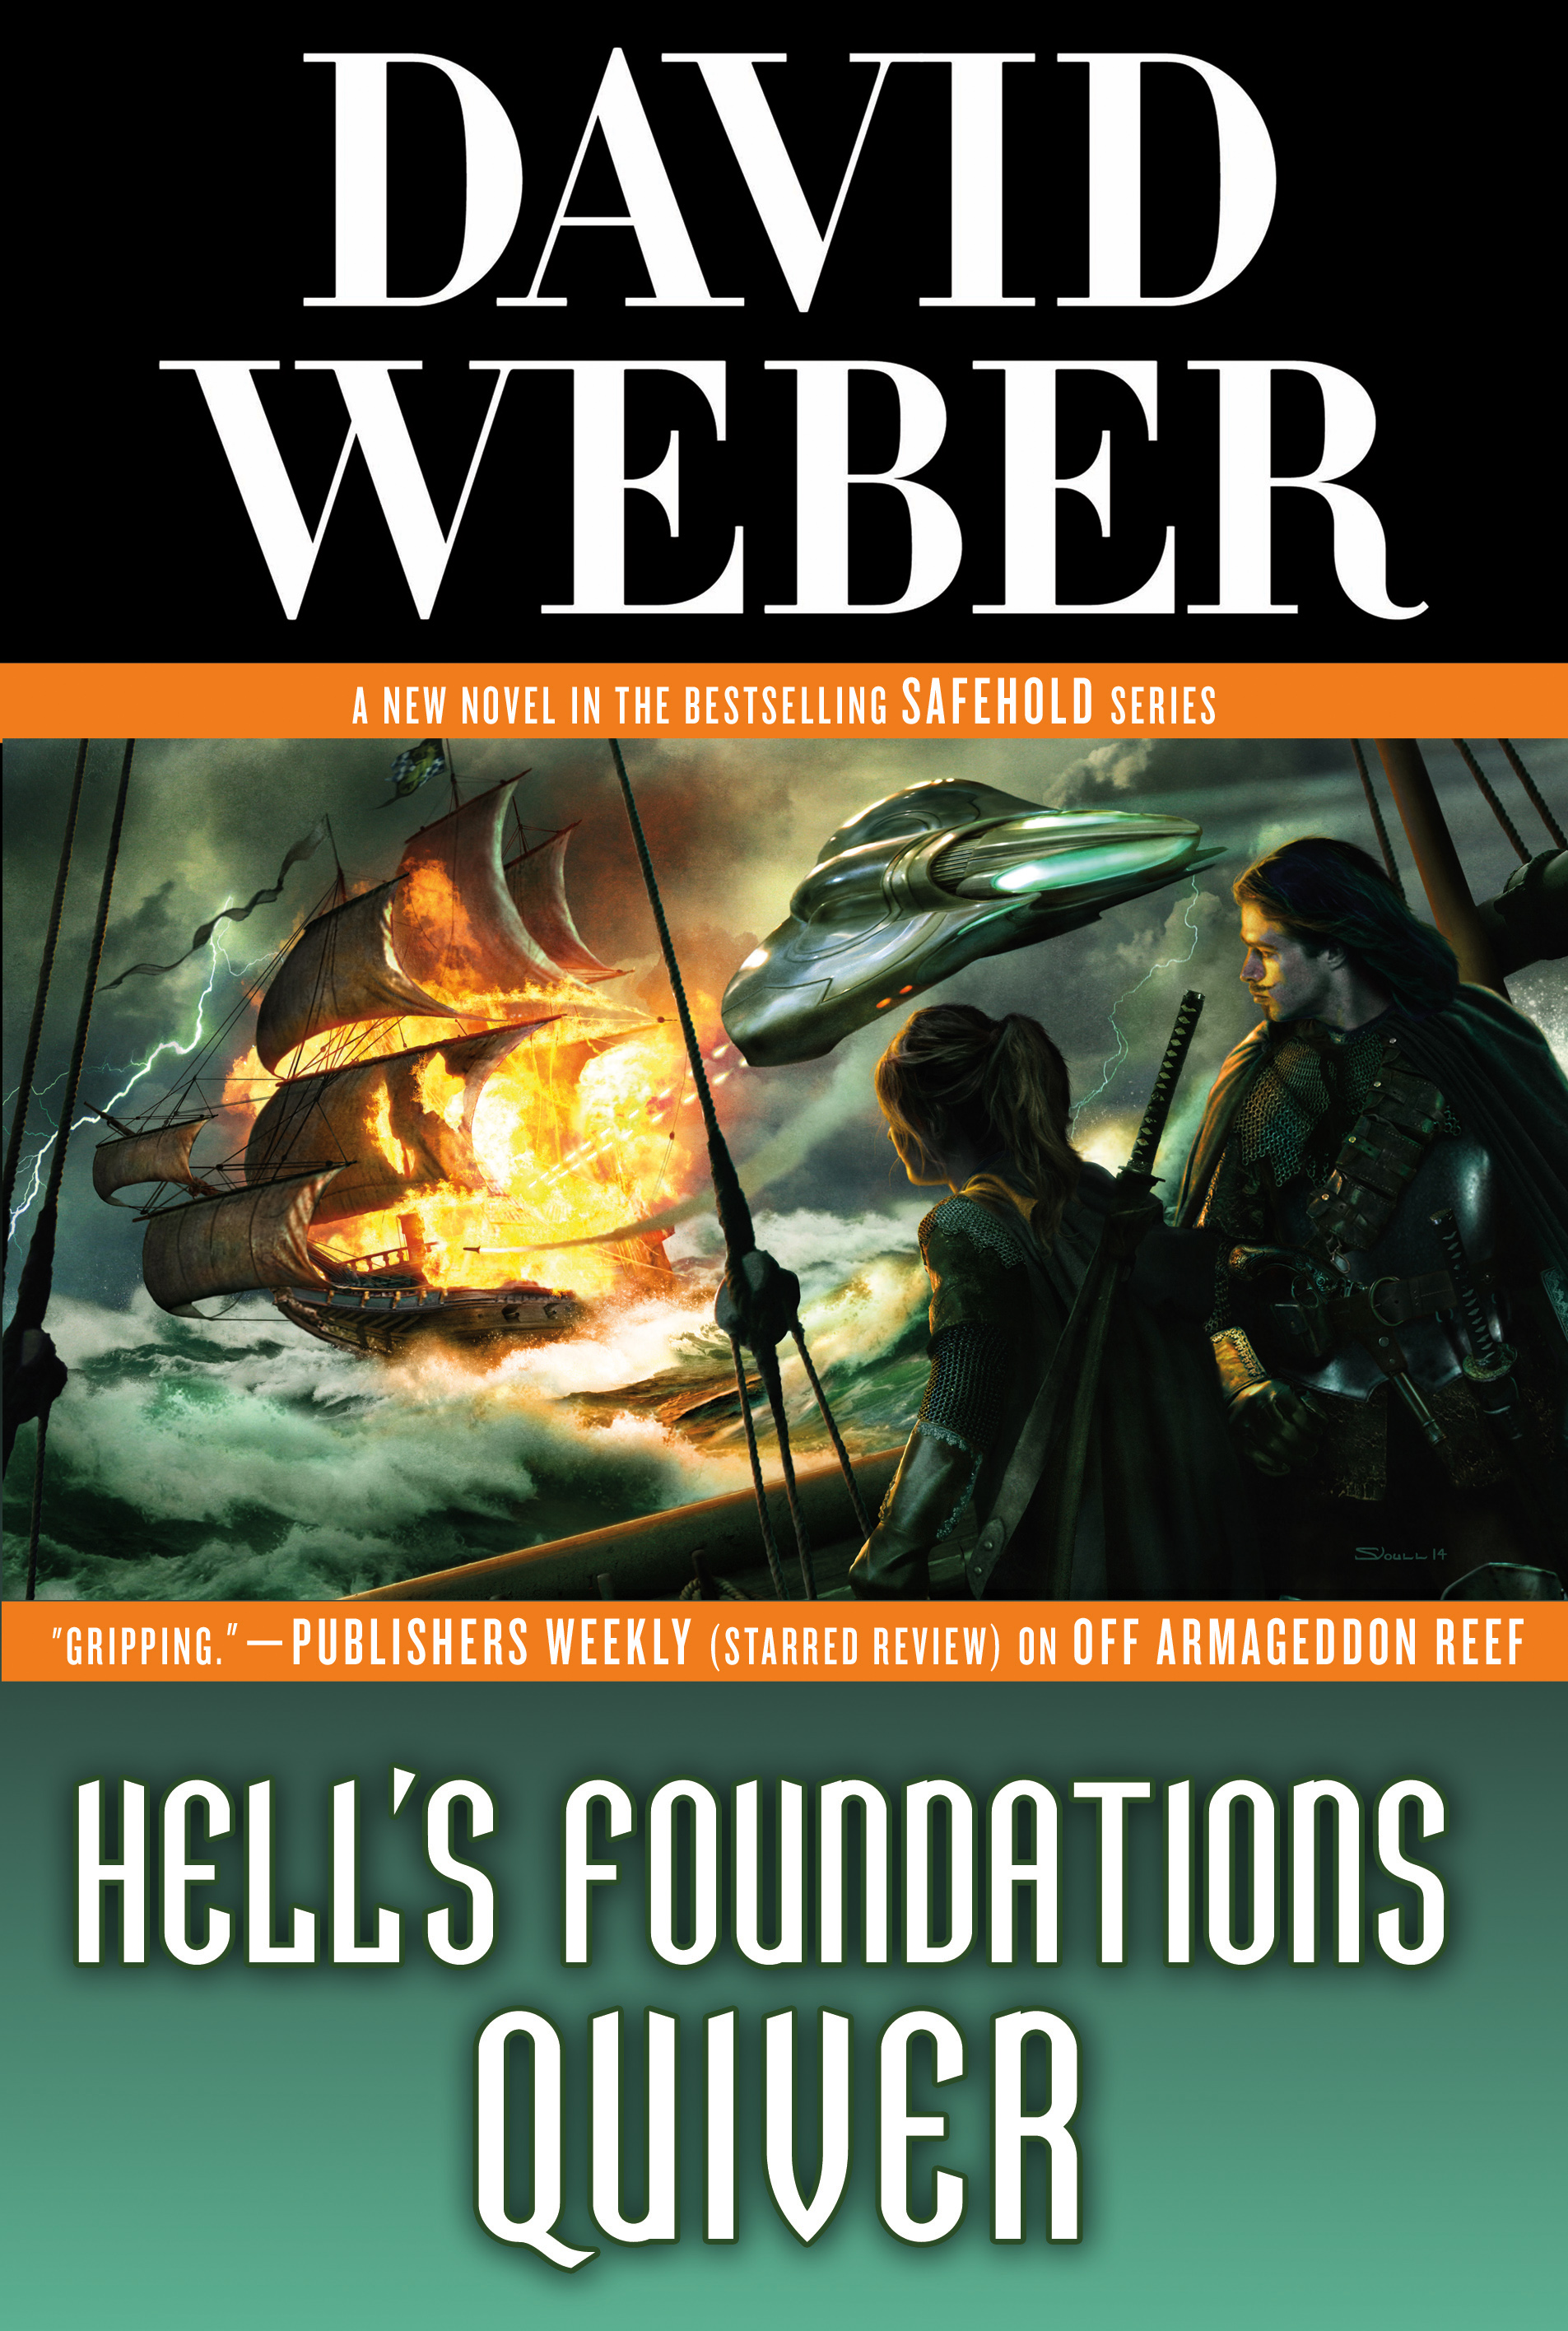 Hell's Foundations Quiver : A Novel in the Safehold Series by David Weber